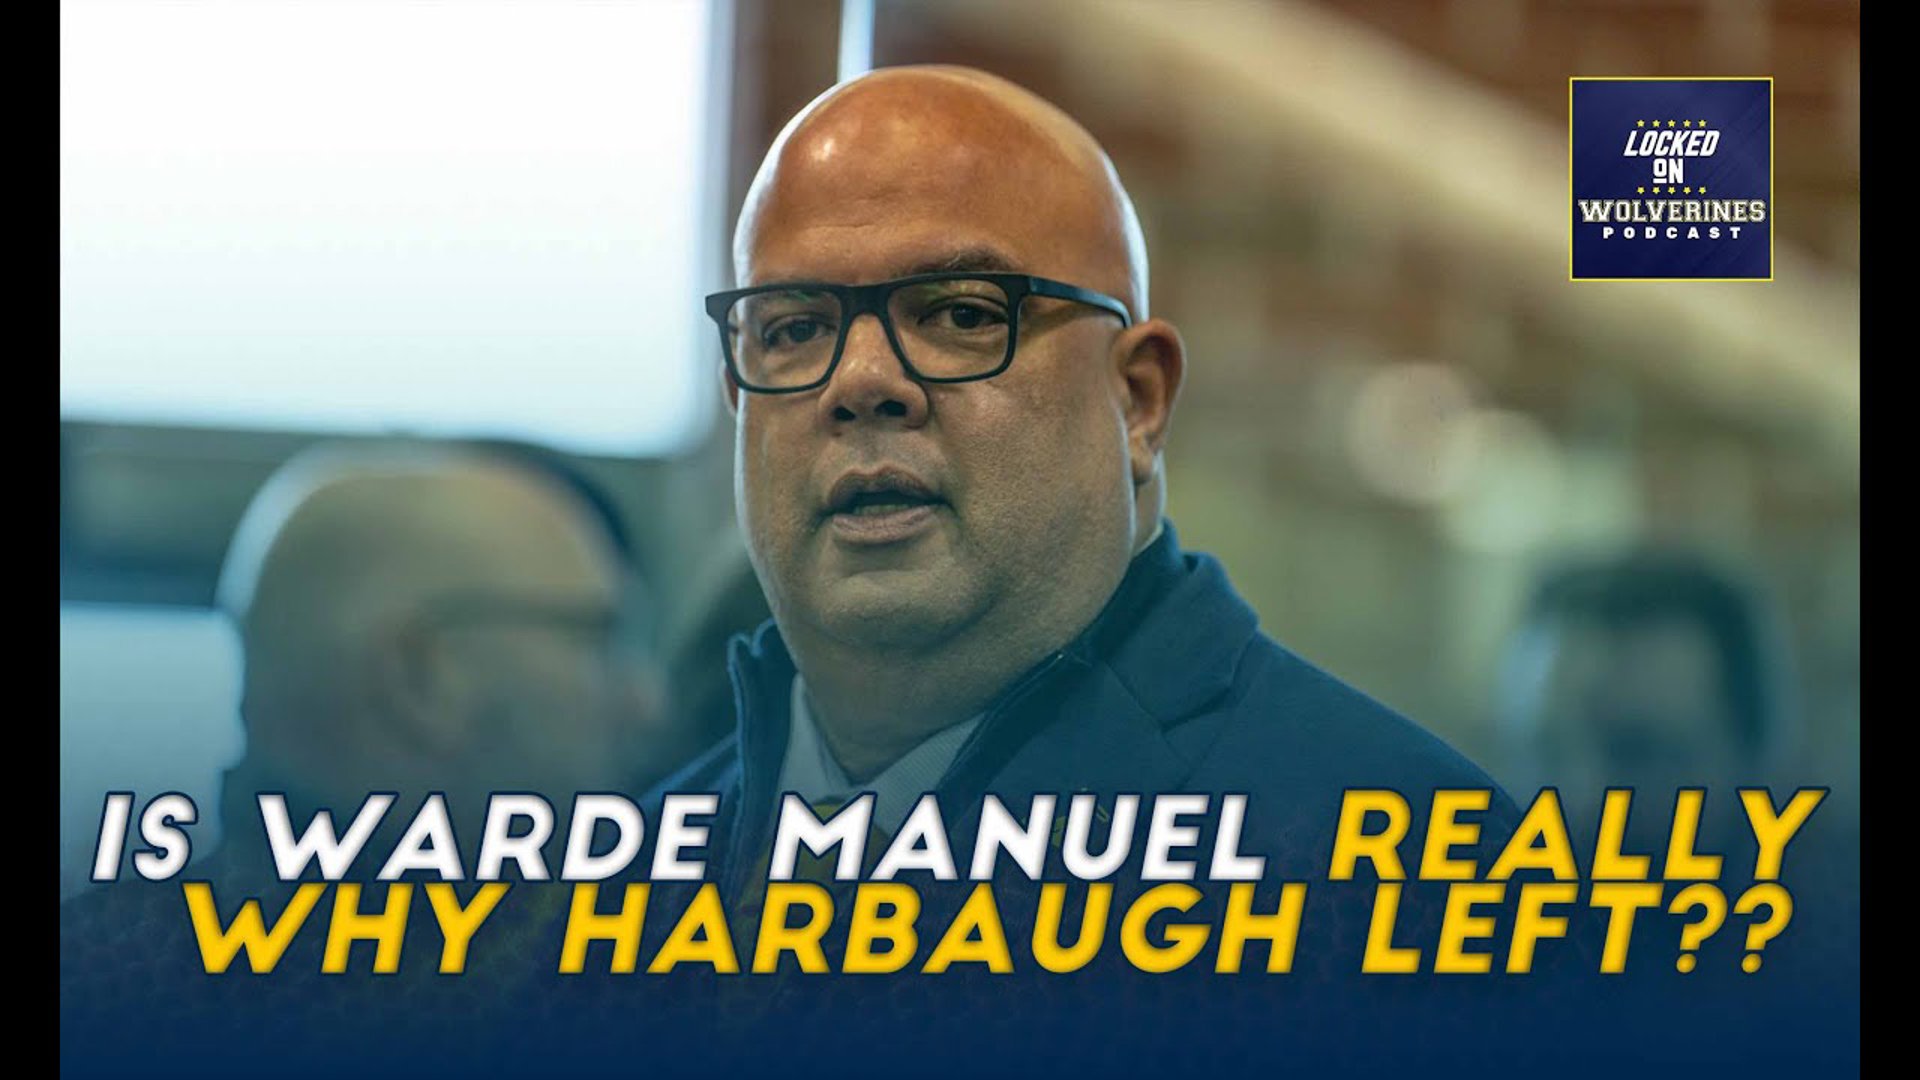 You're reading it wrong if you think Warde Manuel is why Jim Harbaugh left Michigan football